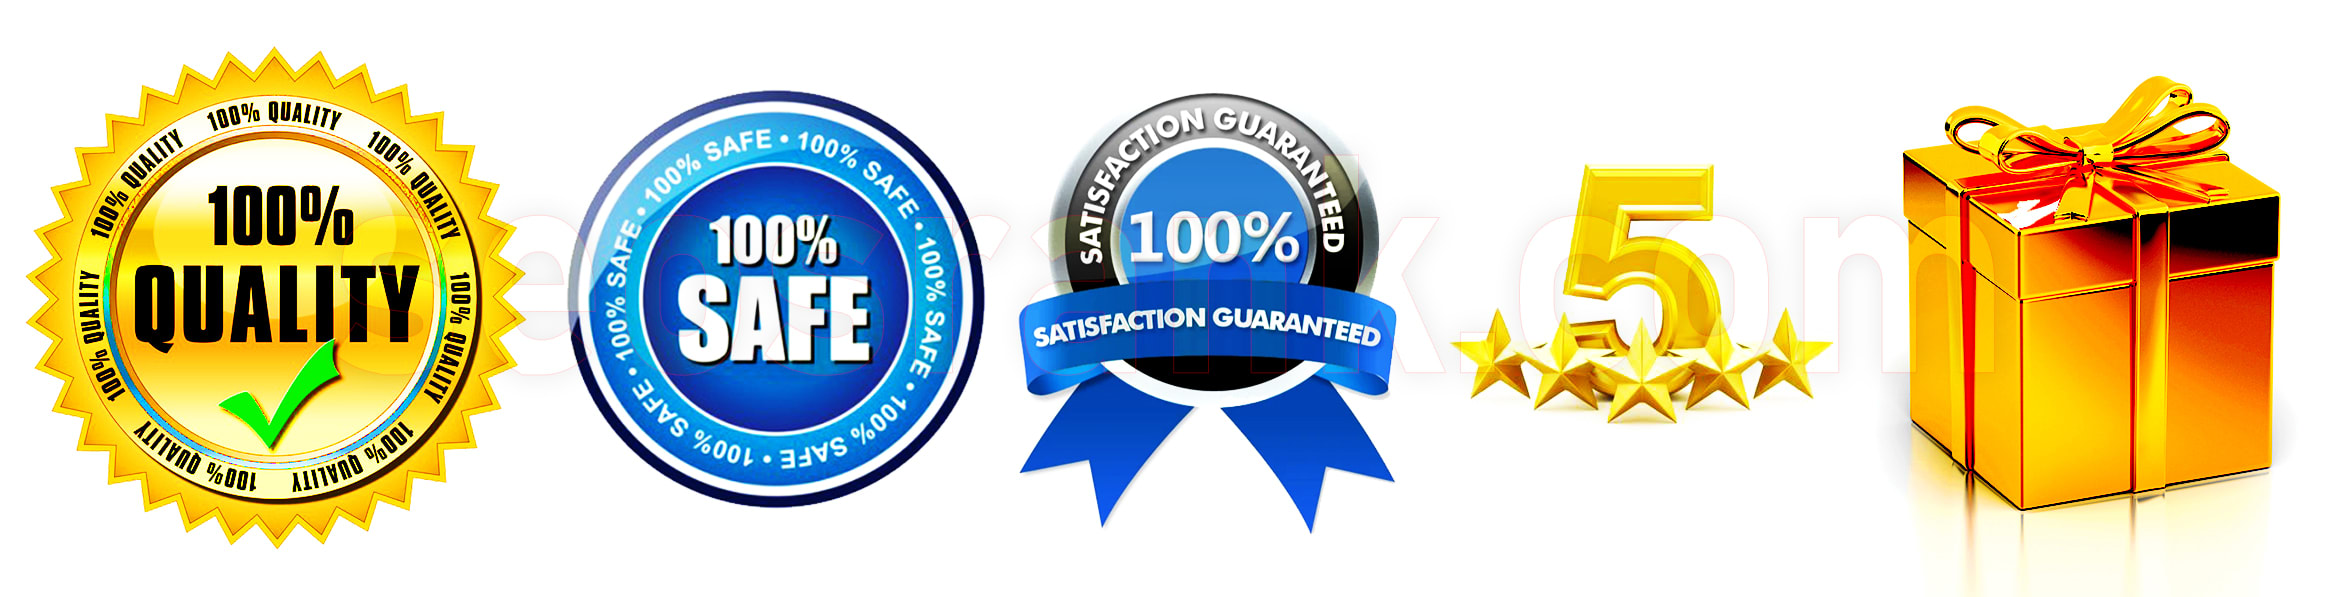 We provide five stars high-quality and safe services with 100% satisfaction guaranteed plus gifts